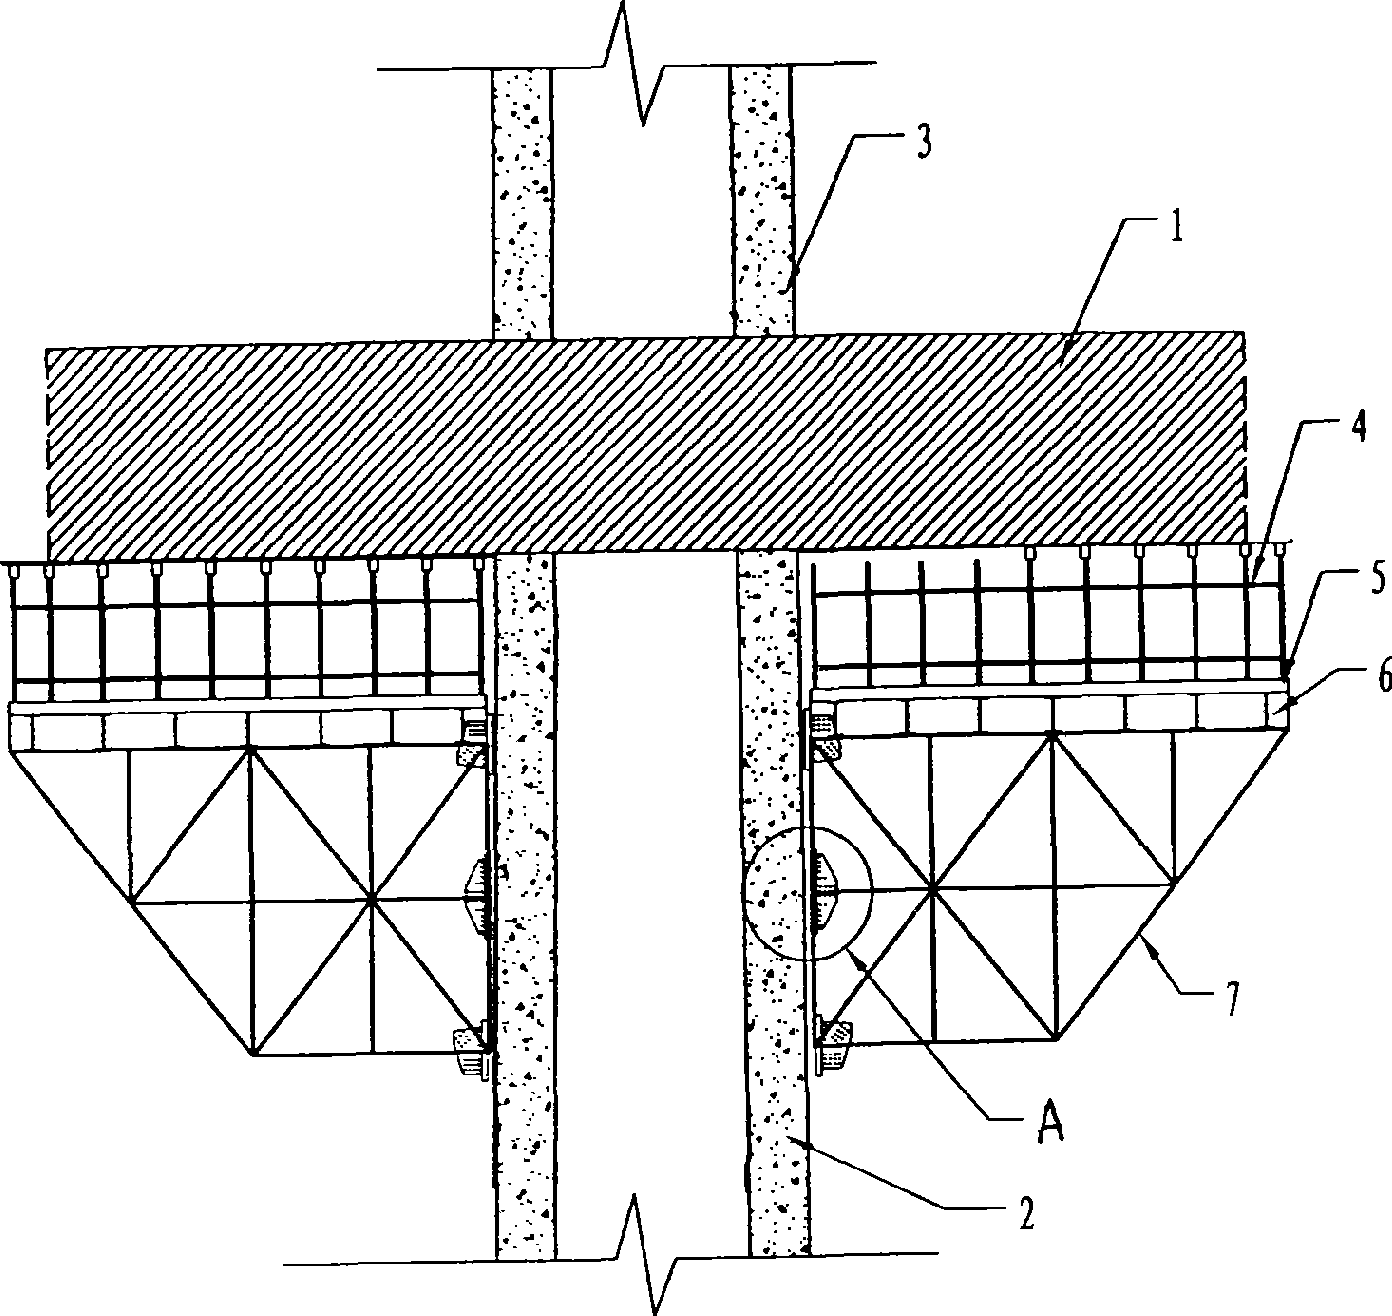 Cast-in-place support for long cantilever No. 0 block of cable-stayed bridge with tower beam consolidation and putting up method